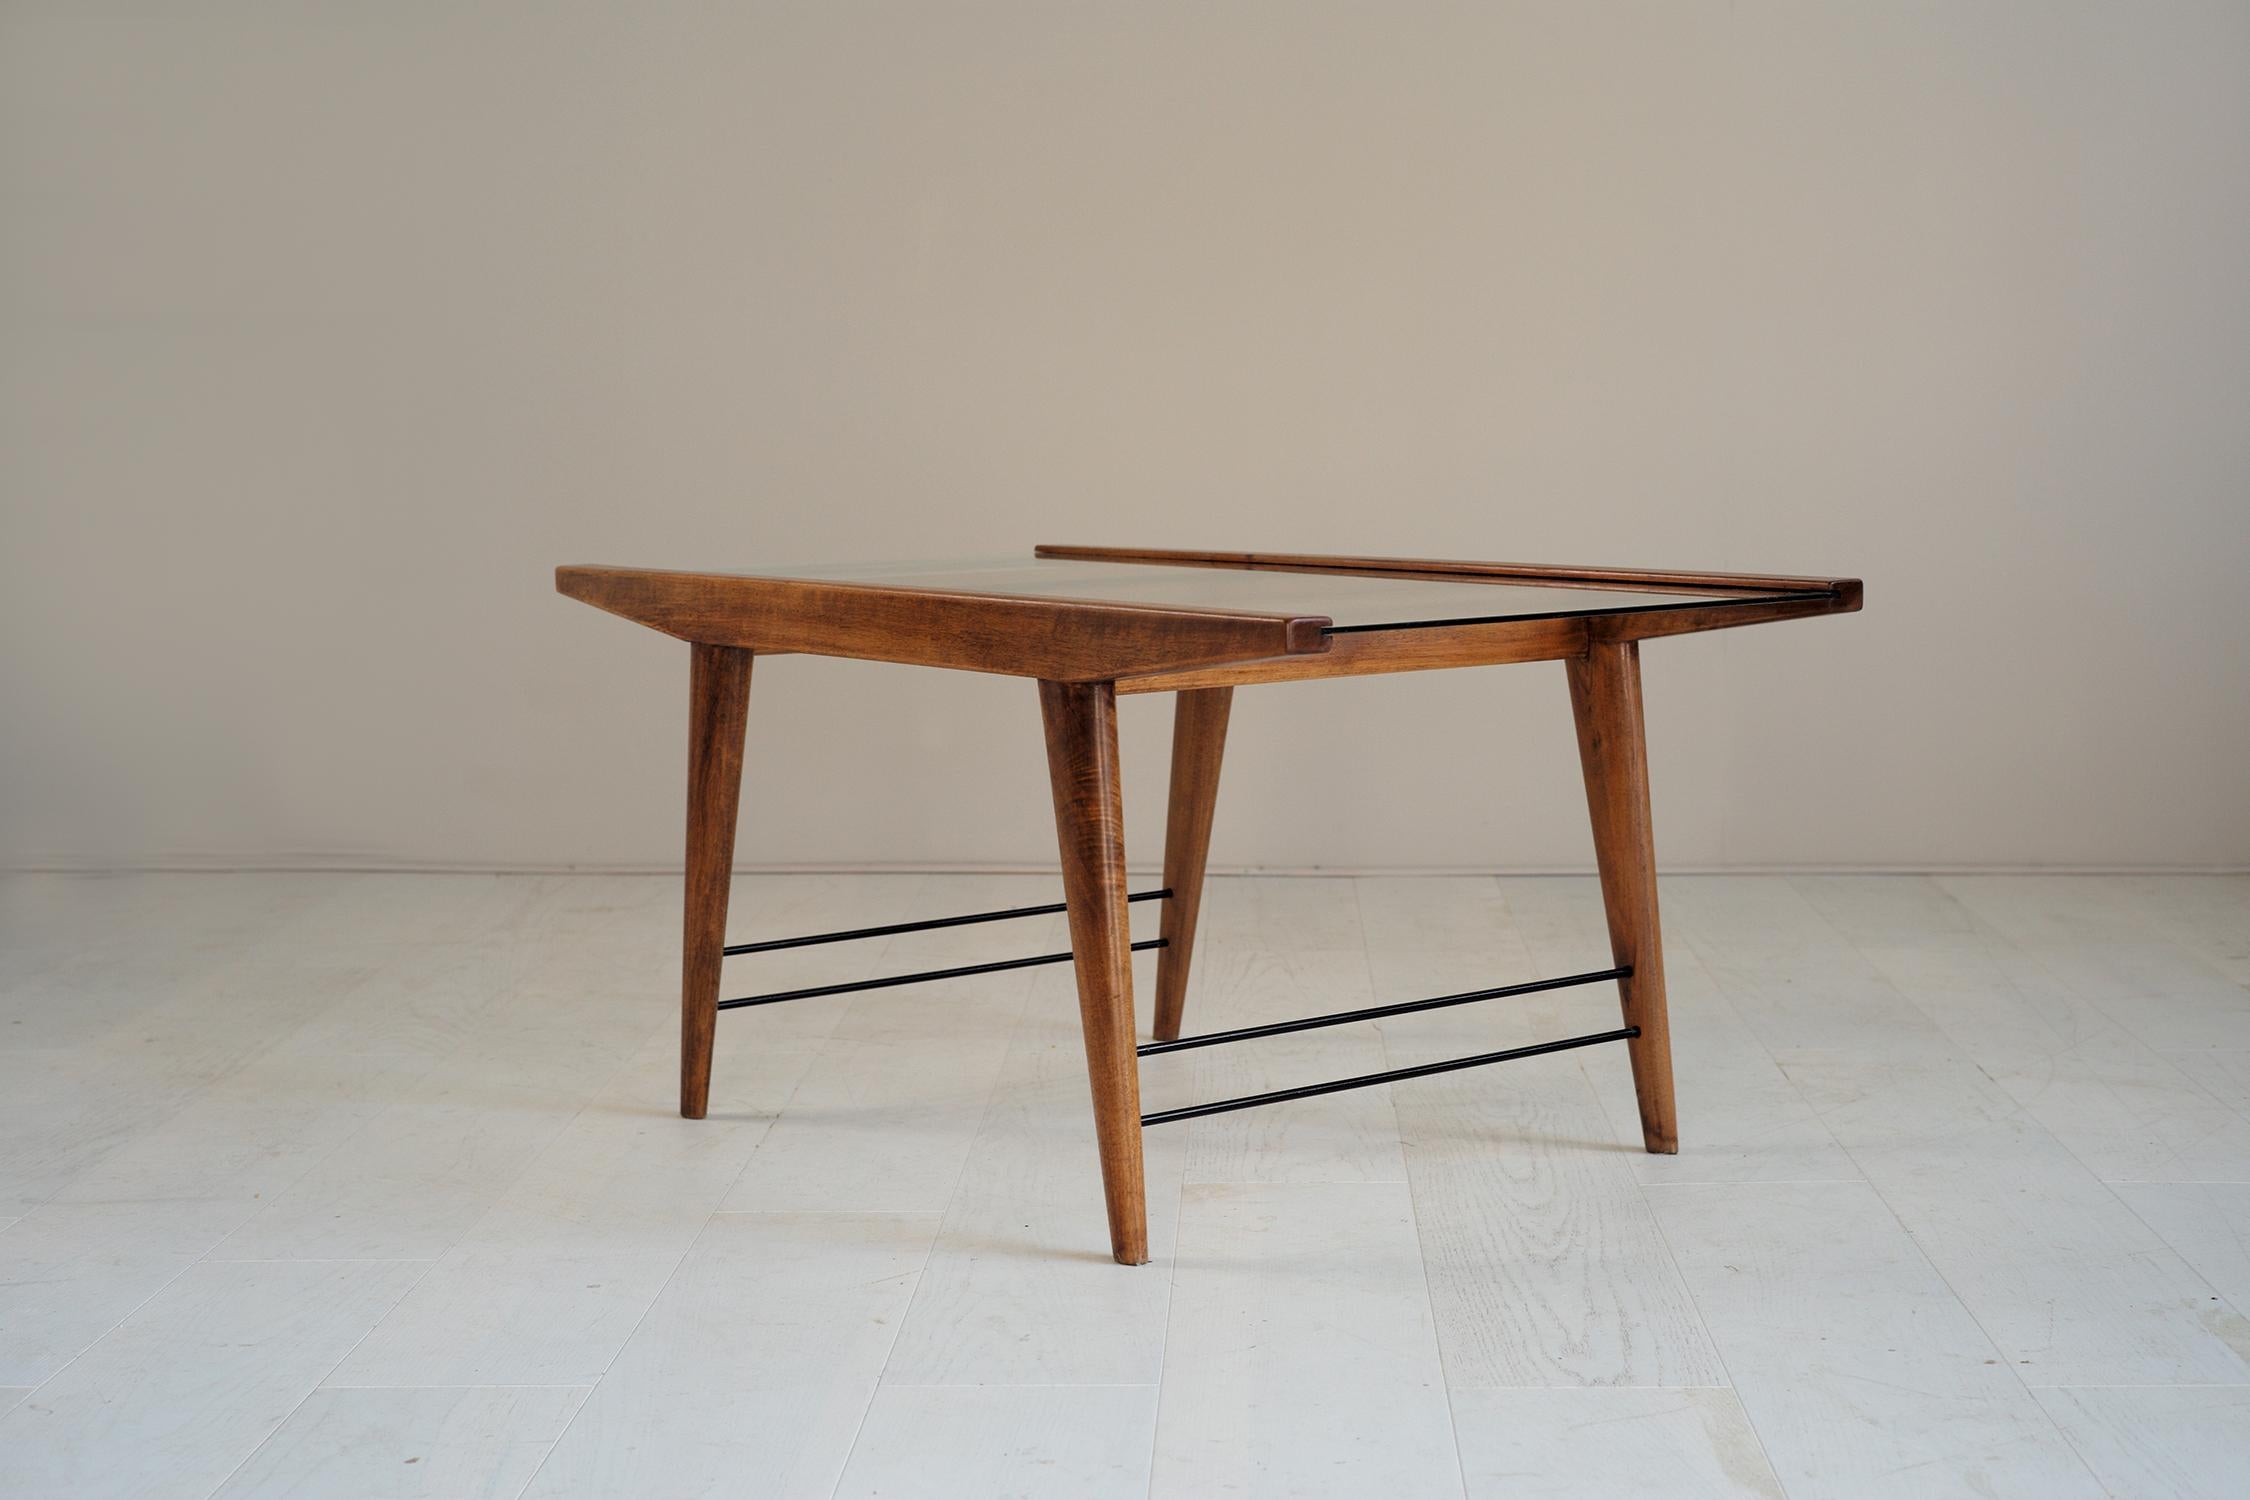 Modernist Coffee Table in Mahogany, Brass and Glass, France, 1950 In Good Condition For Sale In Catonvielle, FR